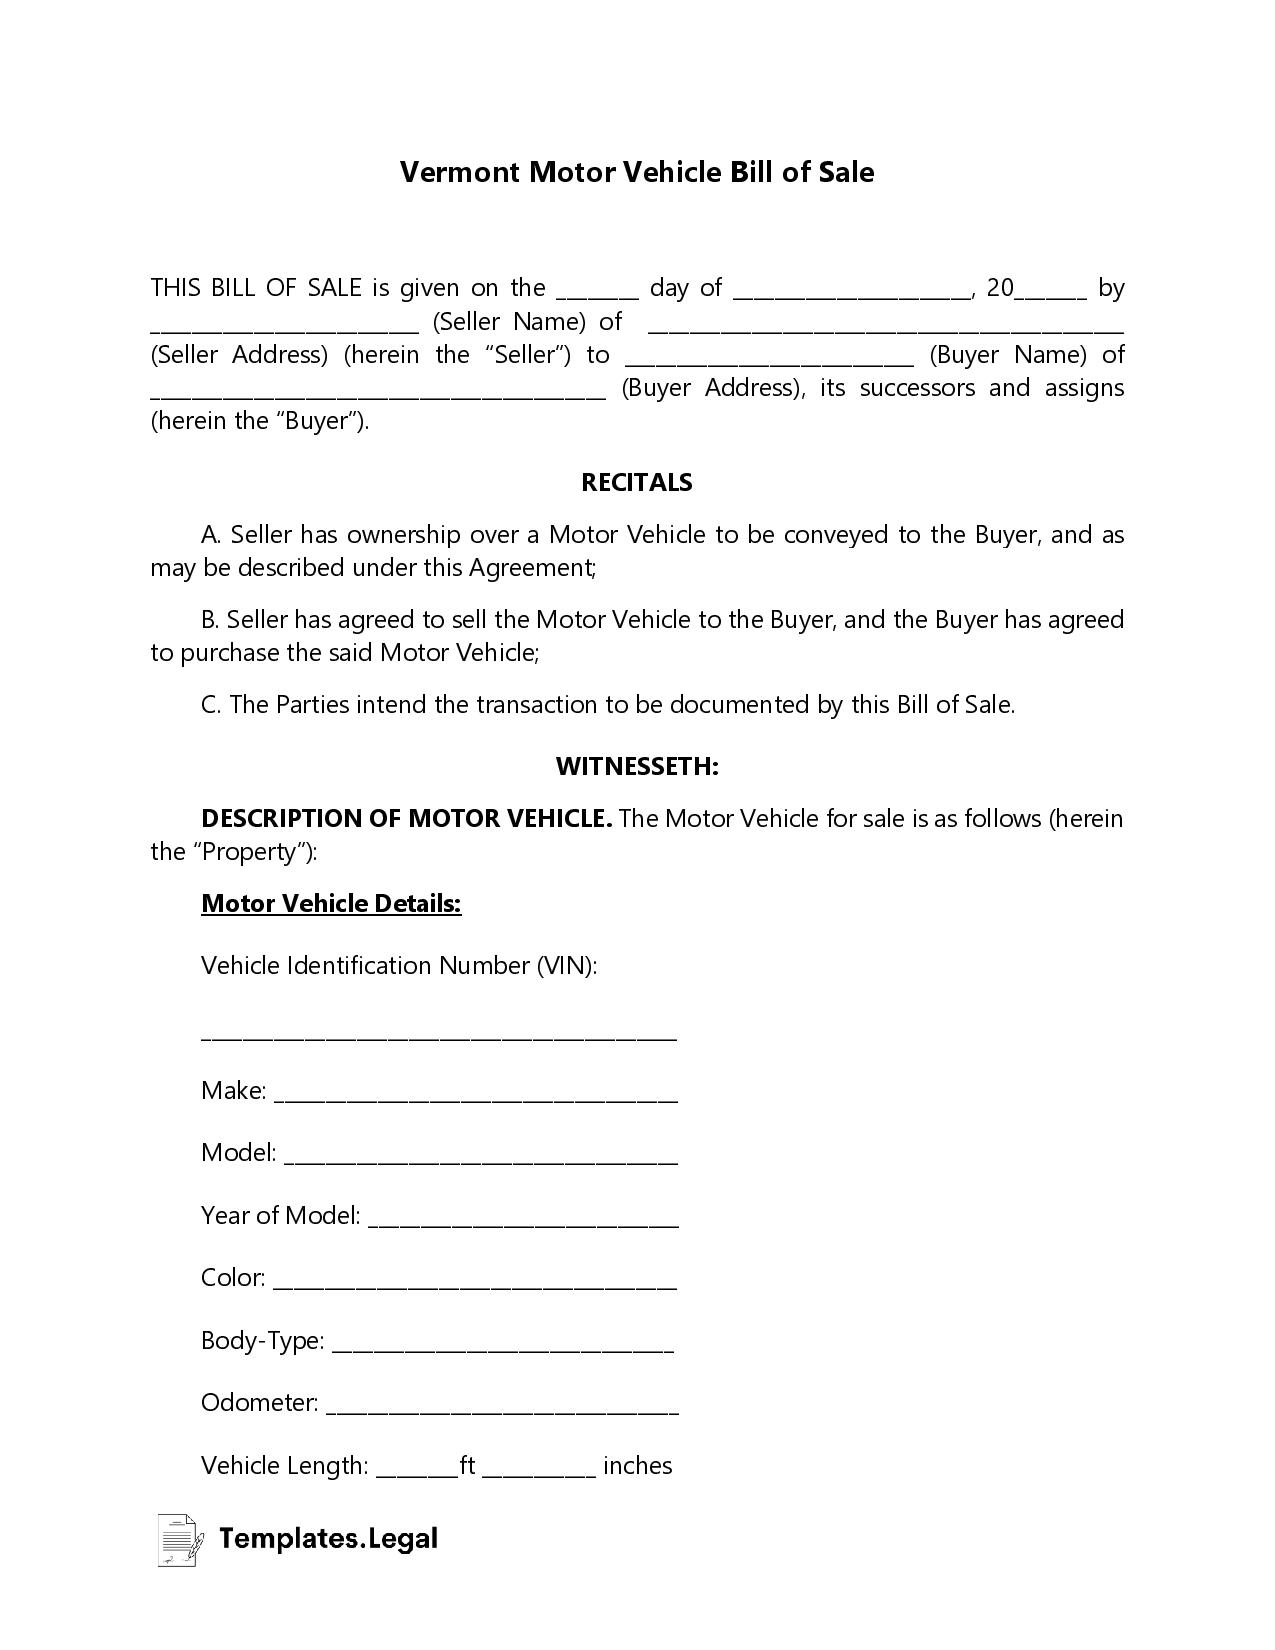 Vermont Motor Vehicle Bill of Sale - Templates.Legal